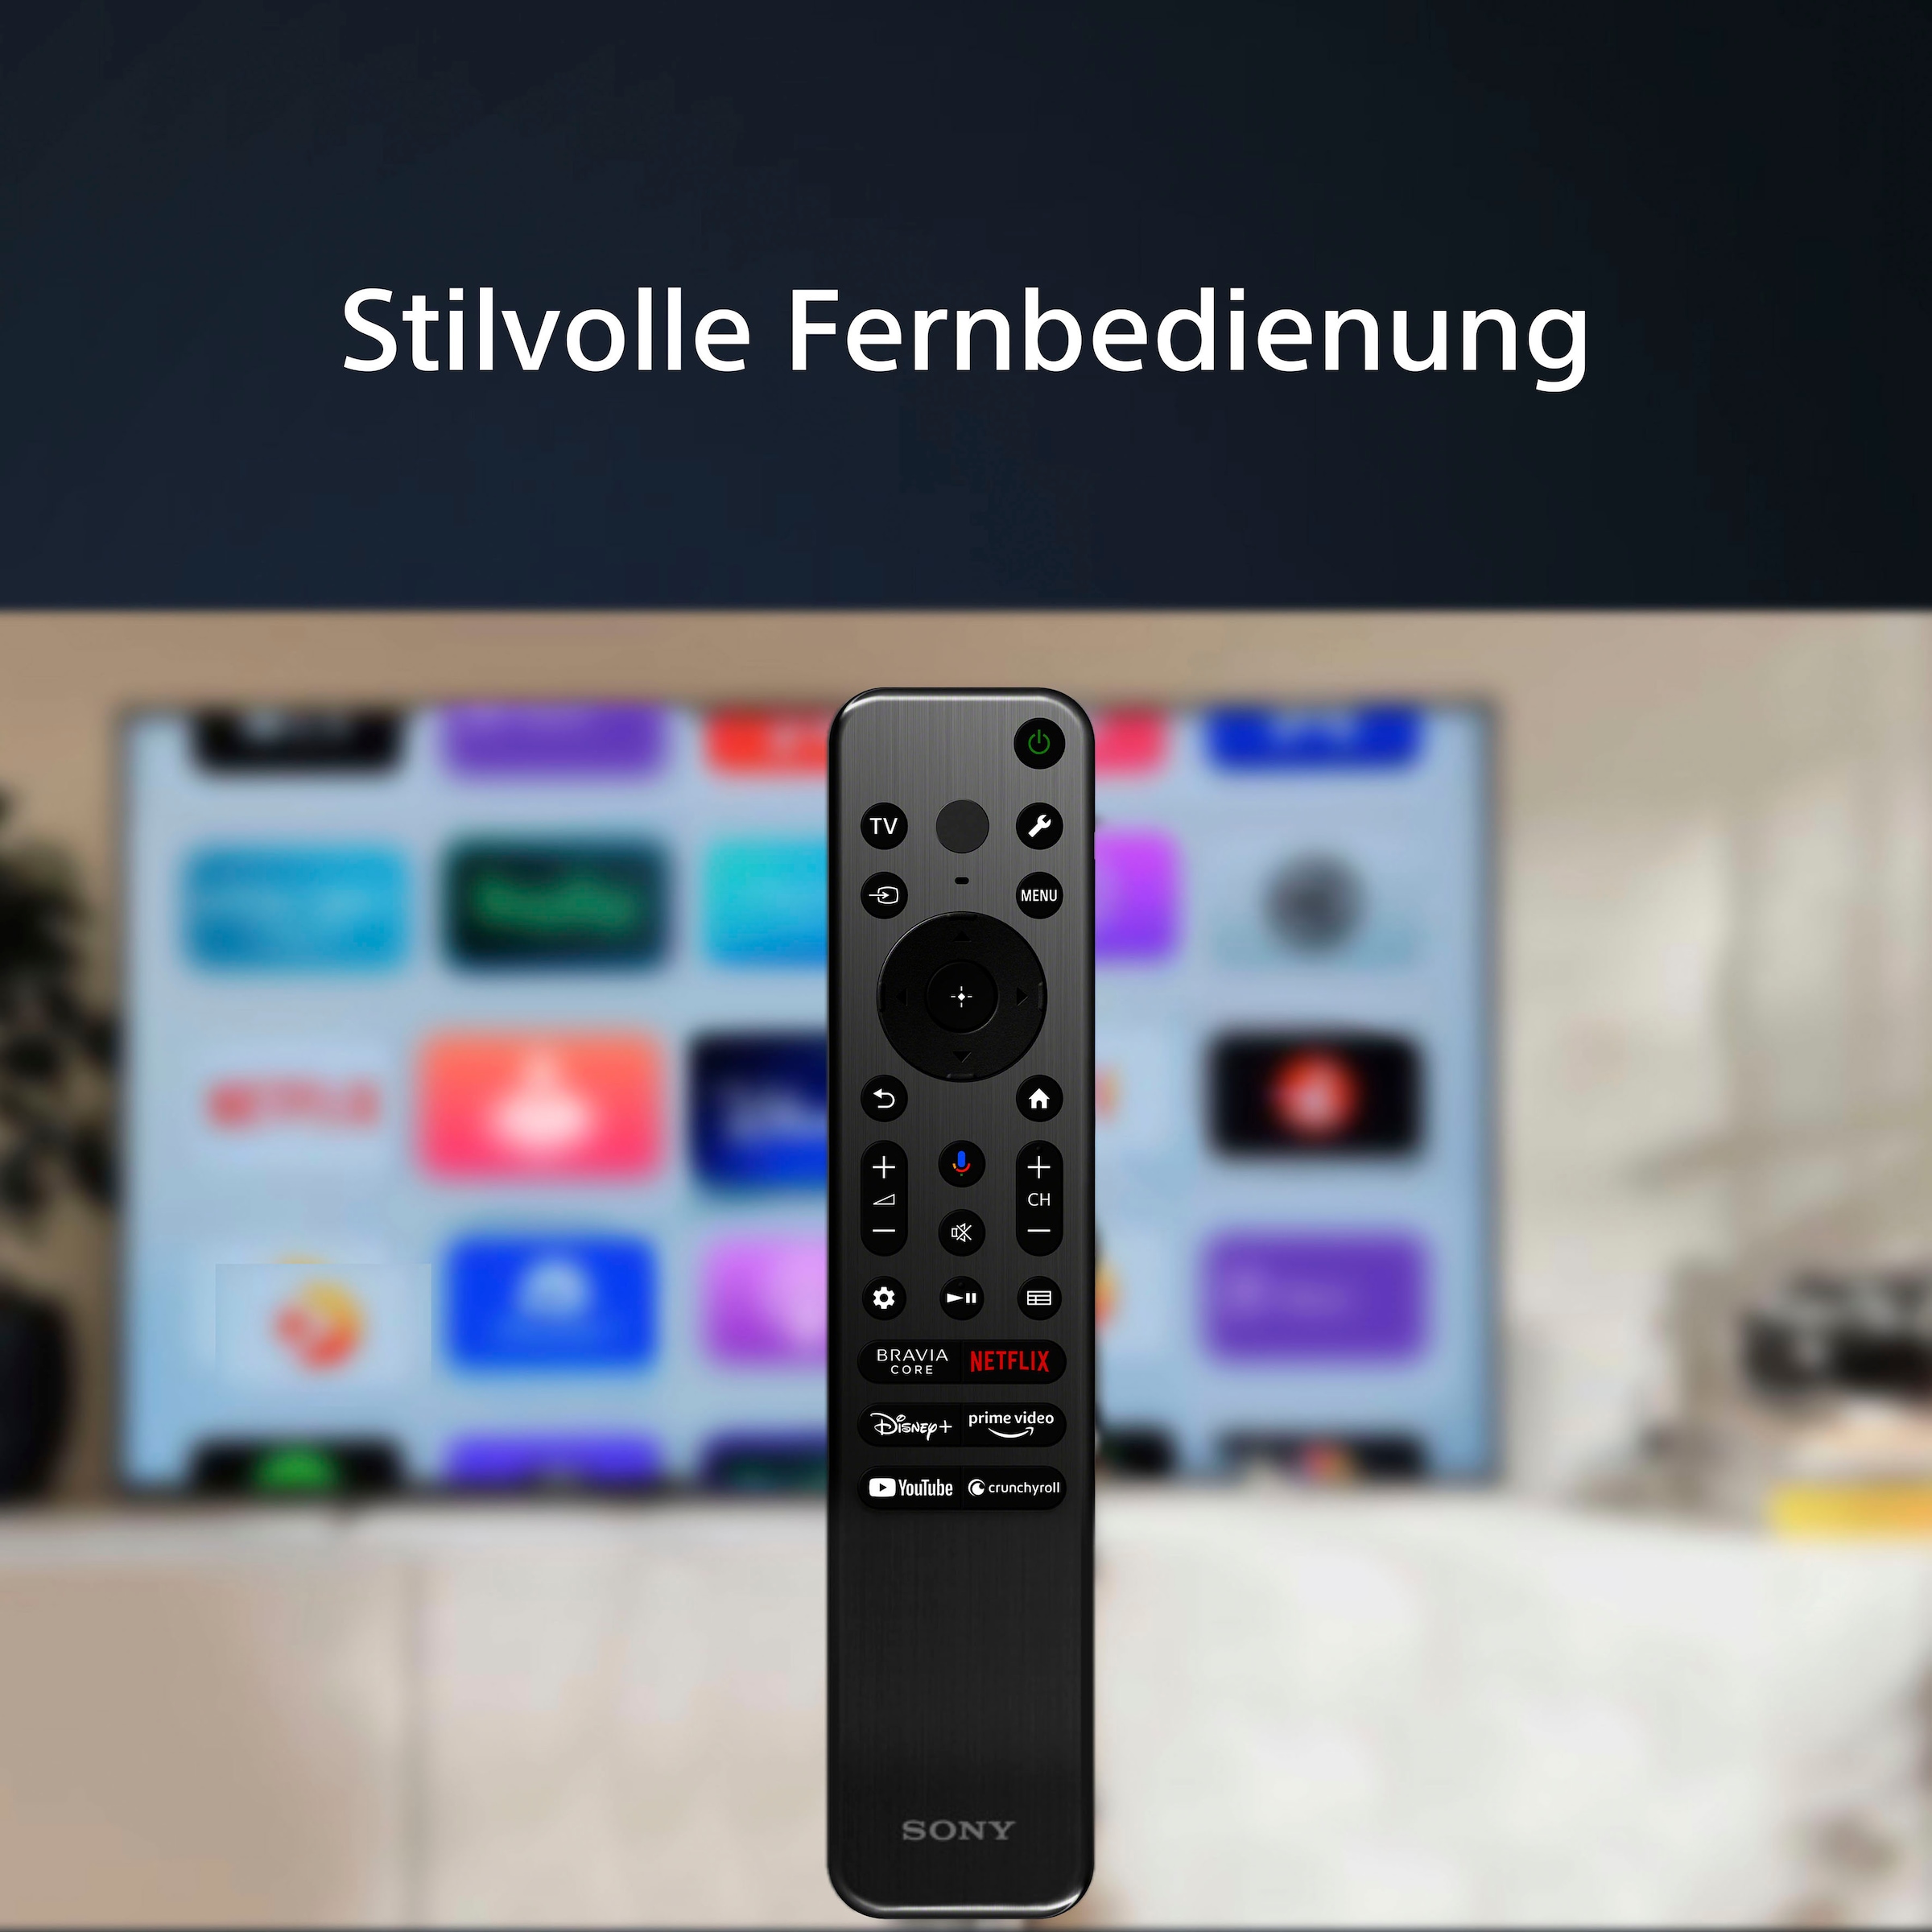 Sony LCD-LED Fernseher, 189 cm/75 Zoll, 4K Ultra HD, Google TV, TRILUMINOS PRO, BRAVIA CORE, mit exklusiven PS5-Features